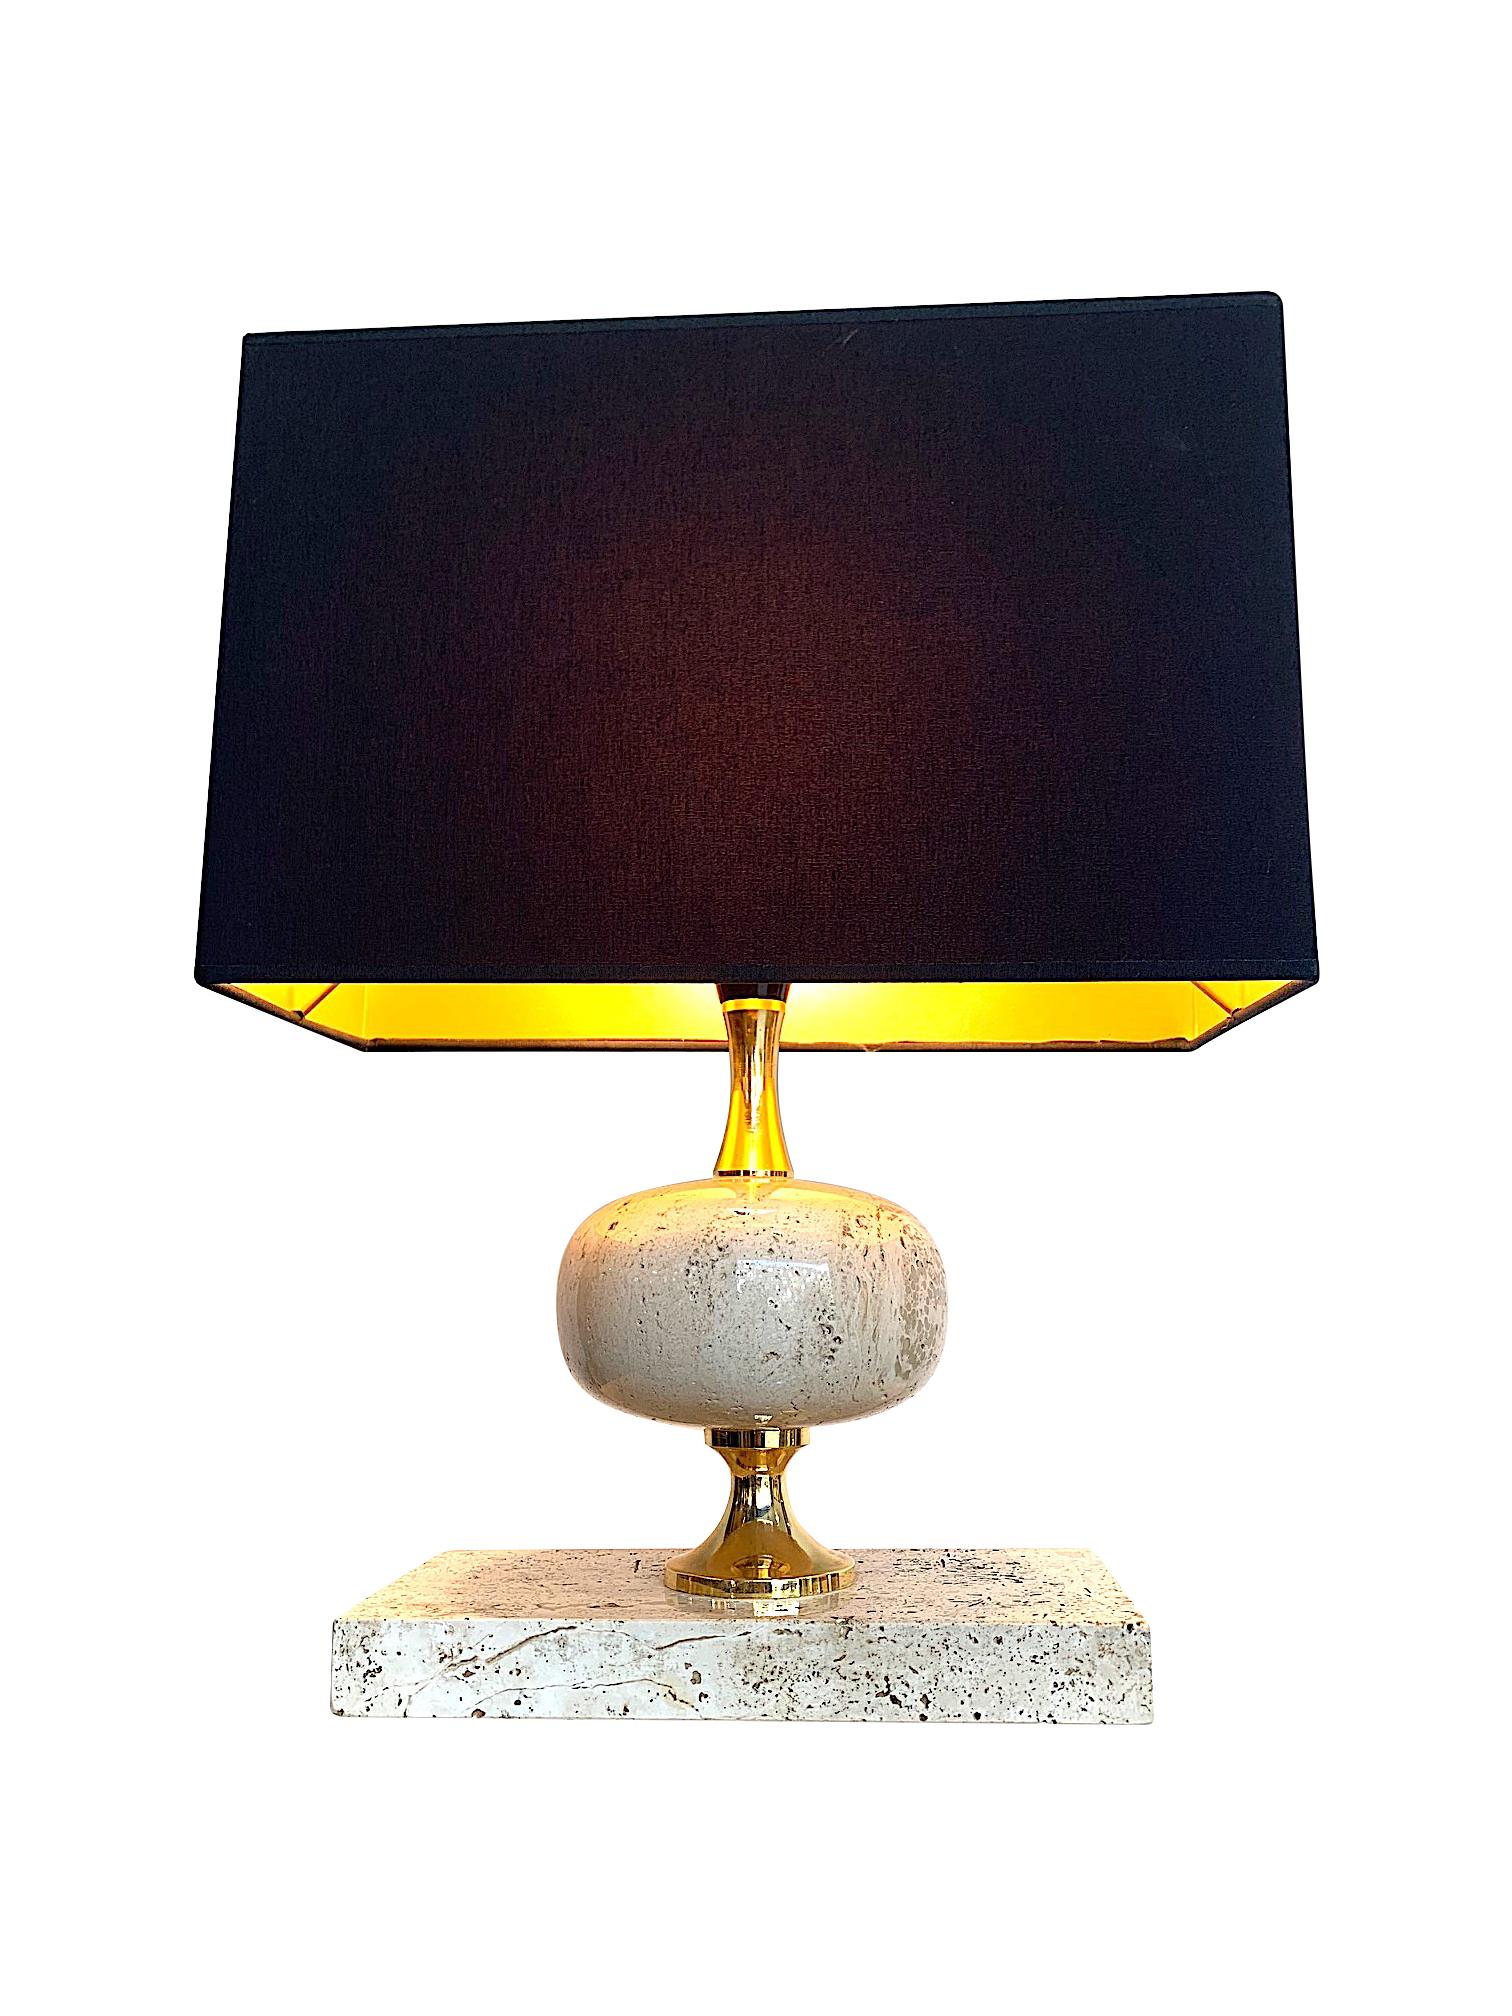 Mid-Century Modern 1970s Maison Barbier Travertine and Brass Lamps with New Bespoke Shade